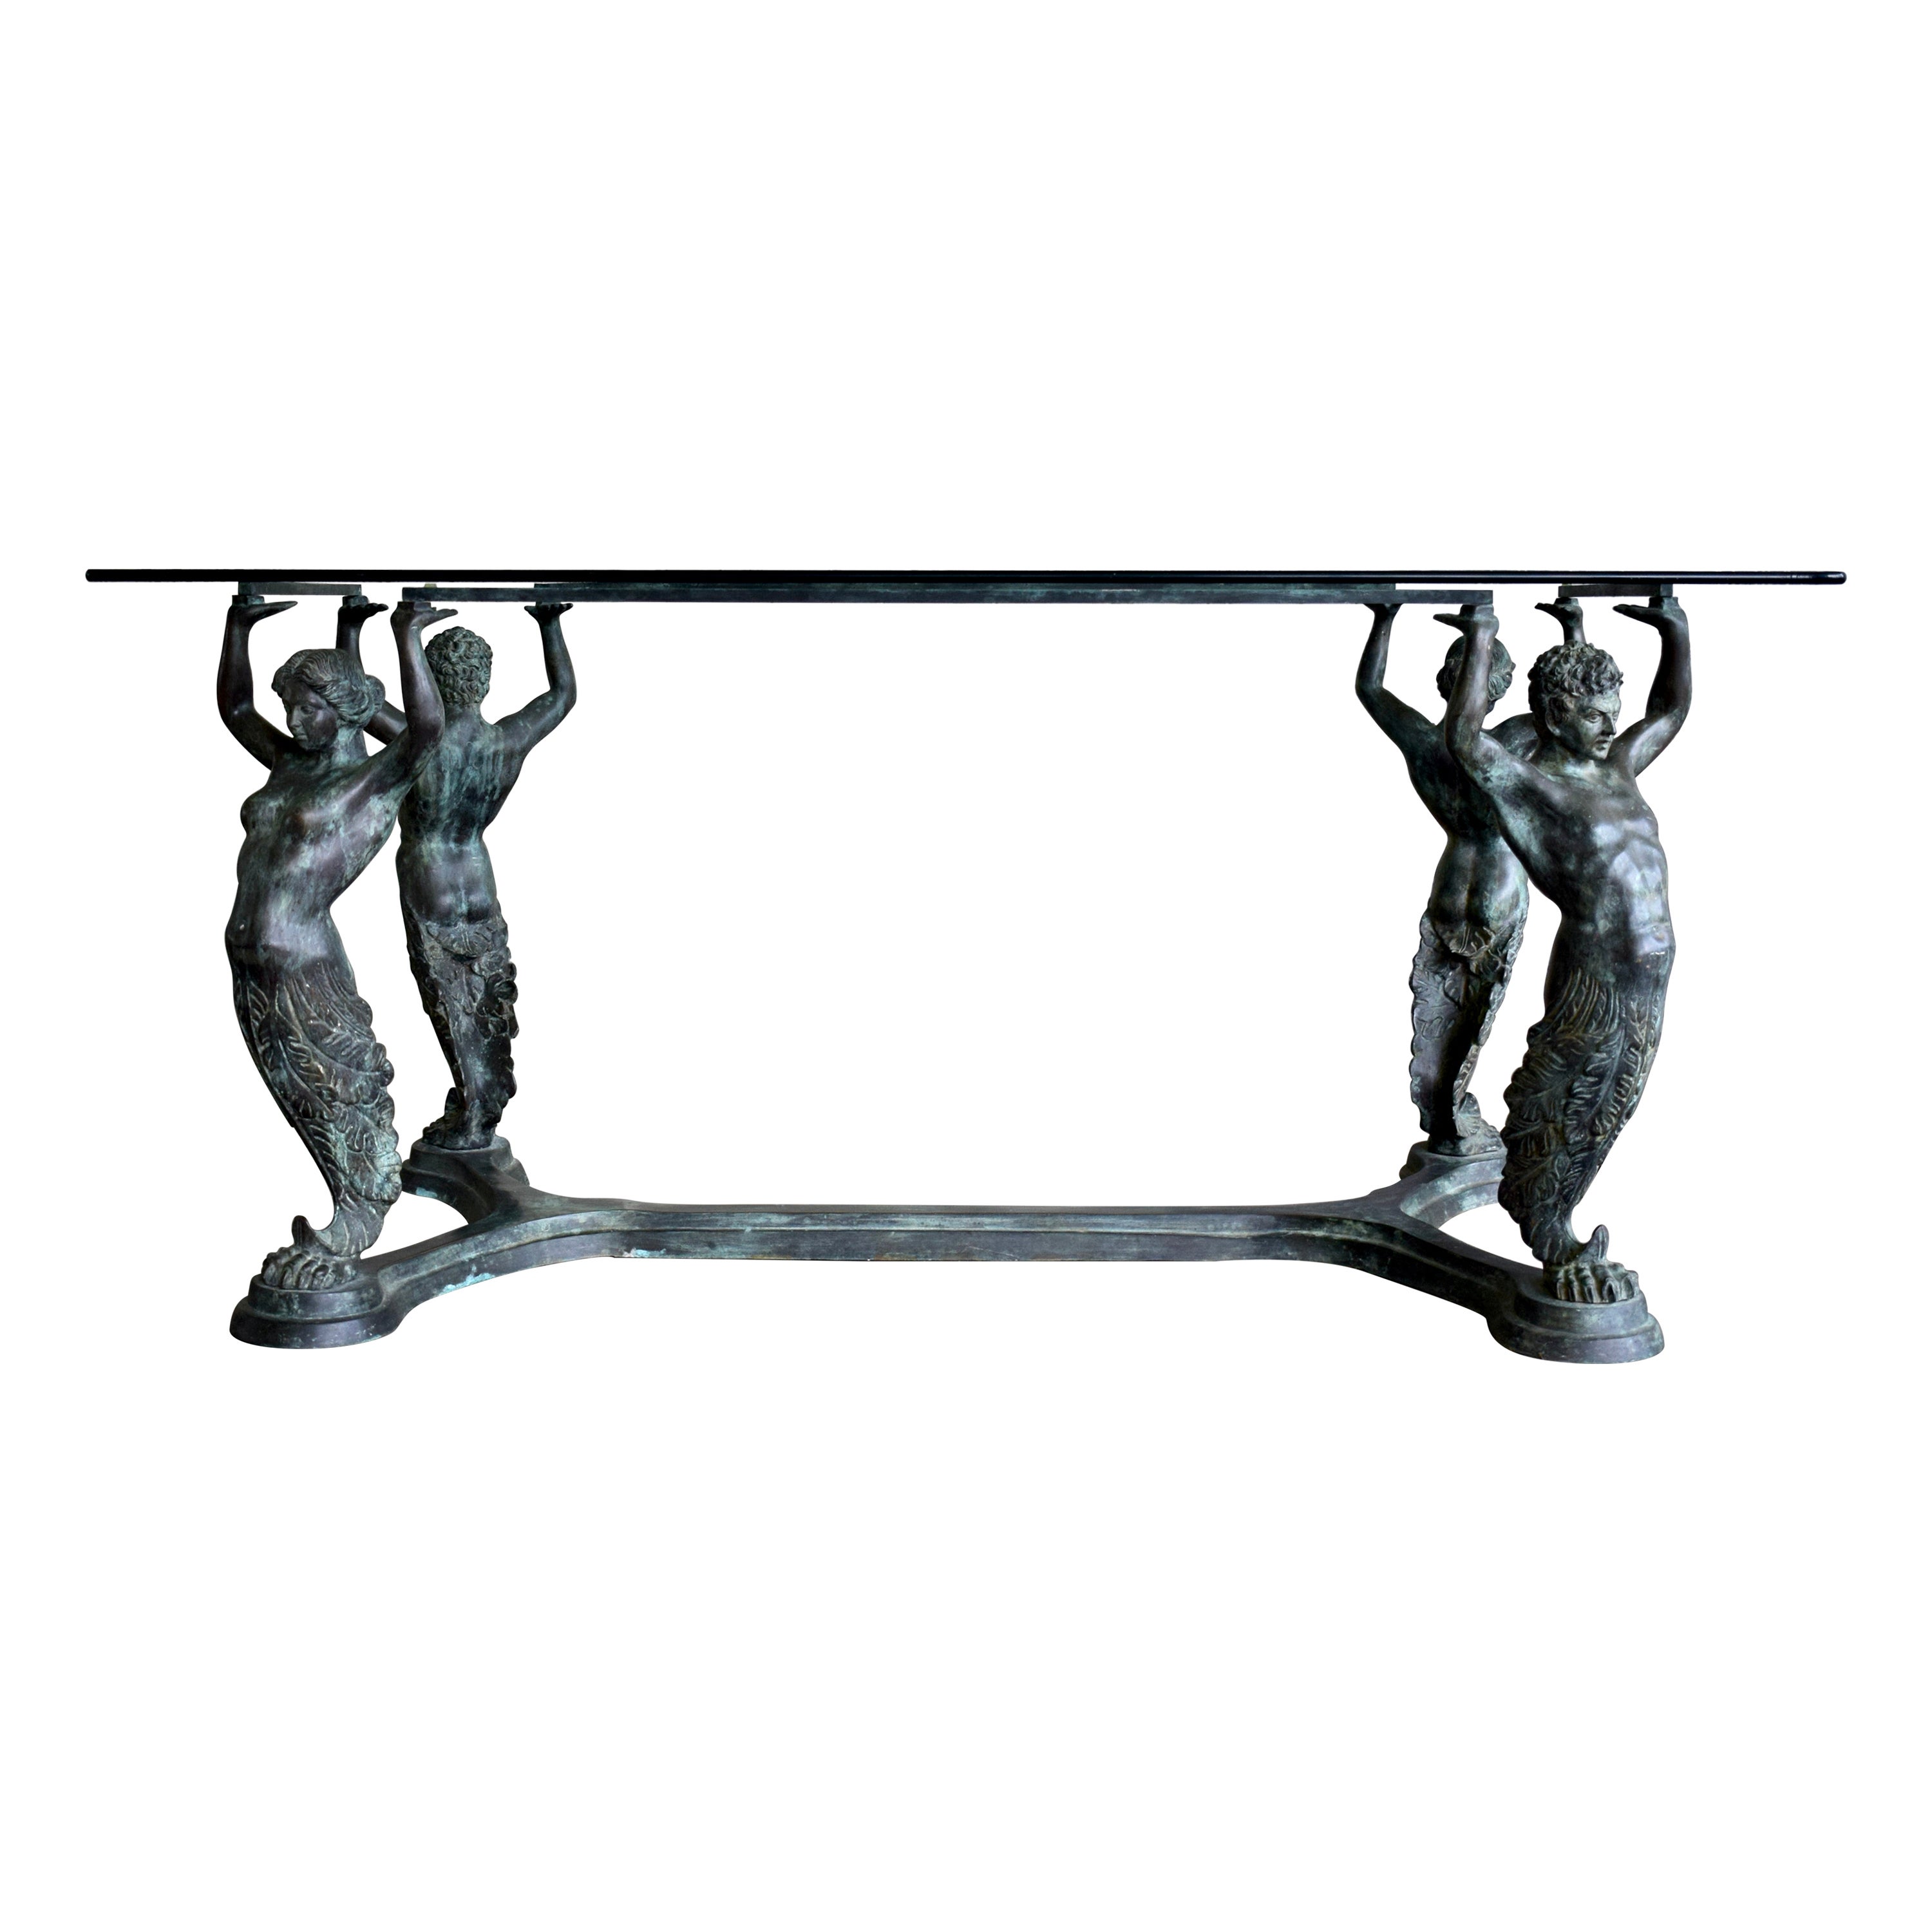 Italian Bronze Neoclassical Style Caryatid & Atlas Dining or Work Table For Sale